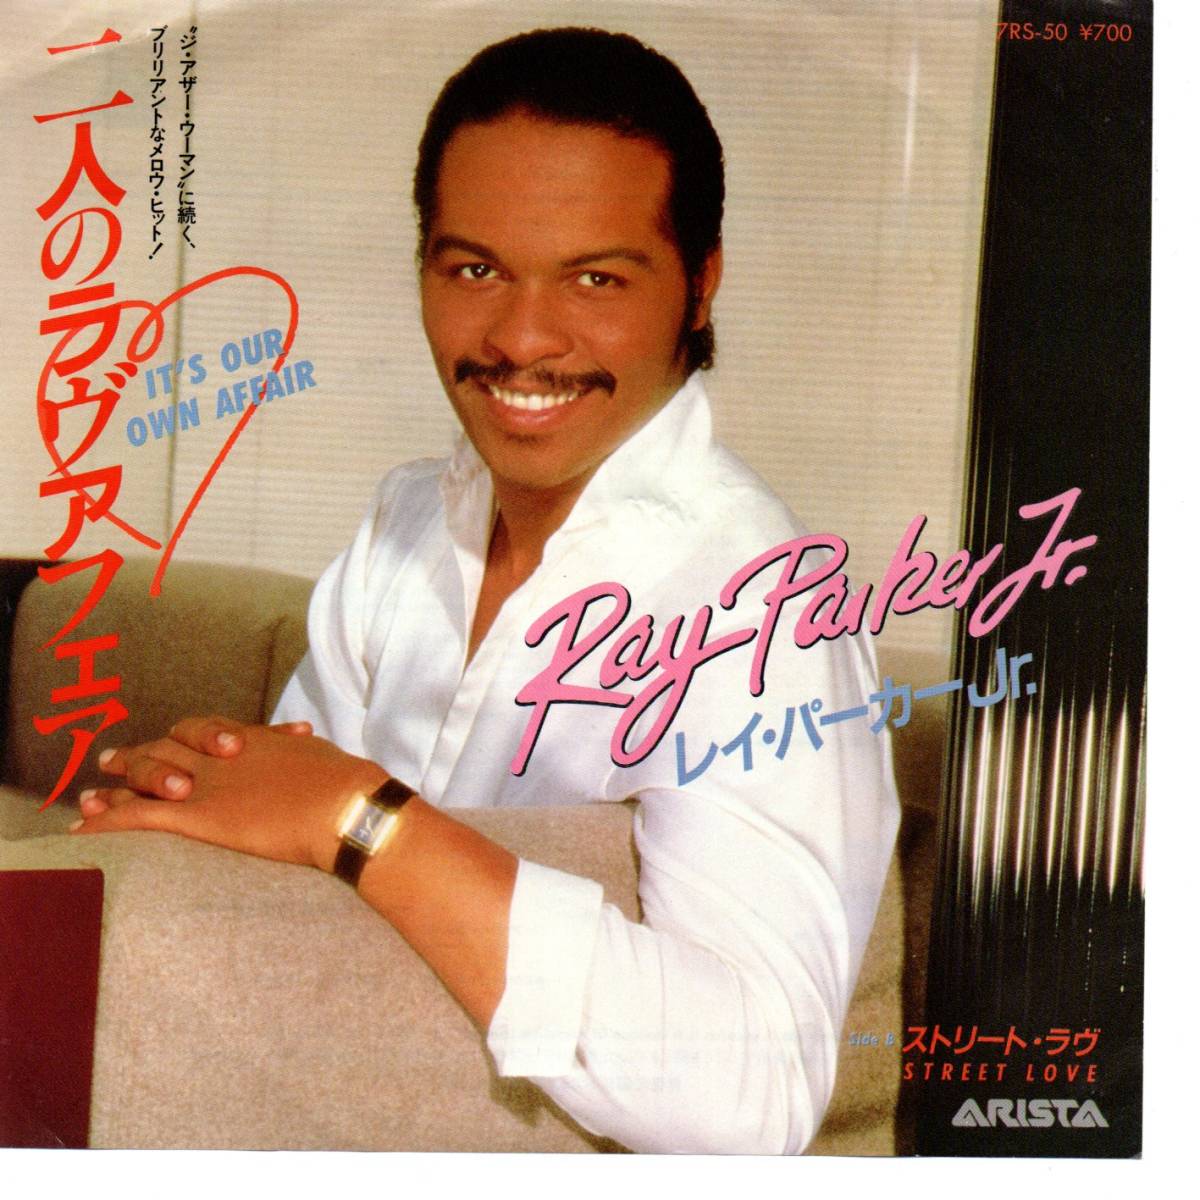 Ray Parker Jr. 「It's Our Own Affair/ Street Love」 国内盤EPレコード_画像1